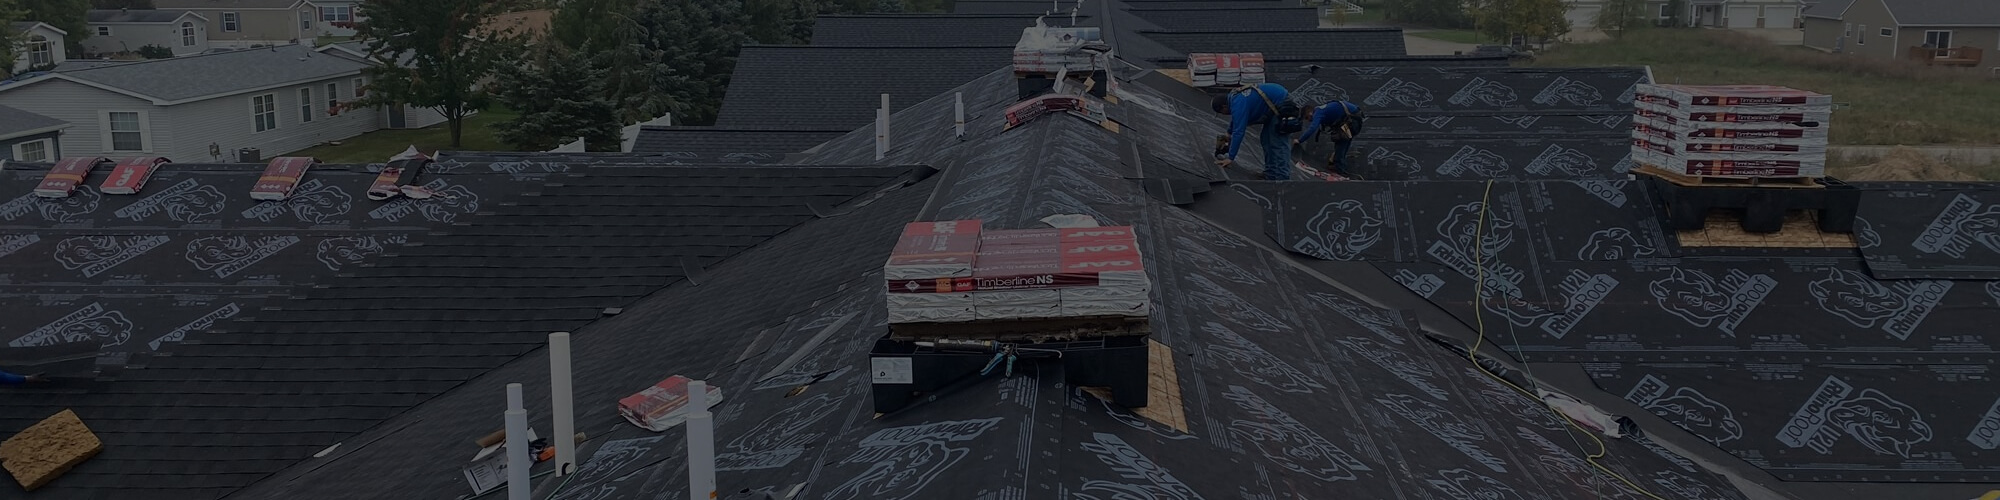 Commercial roofing near Grand Rapids and Holland, Michigan